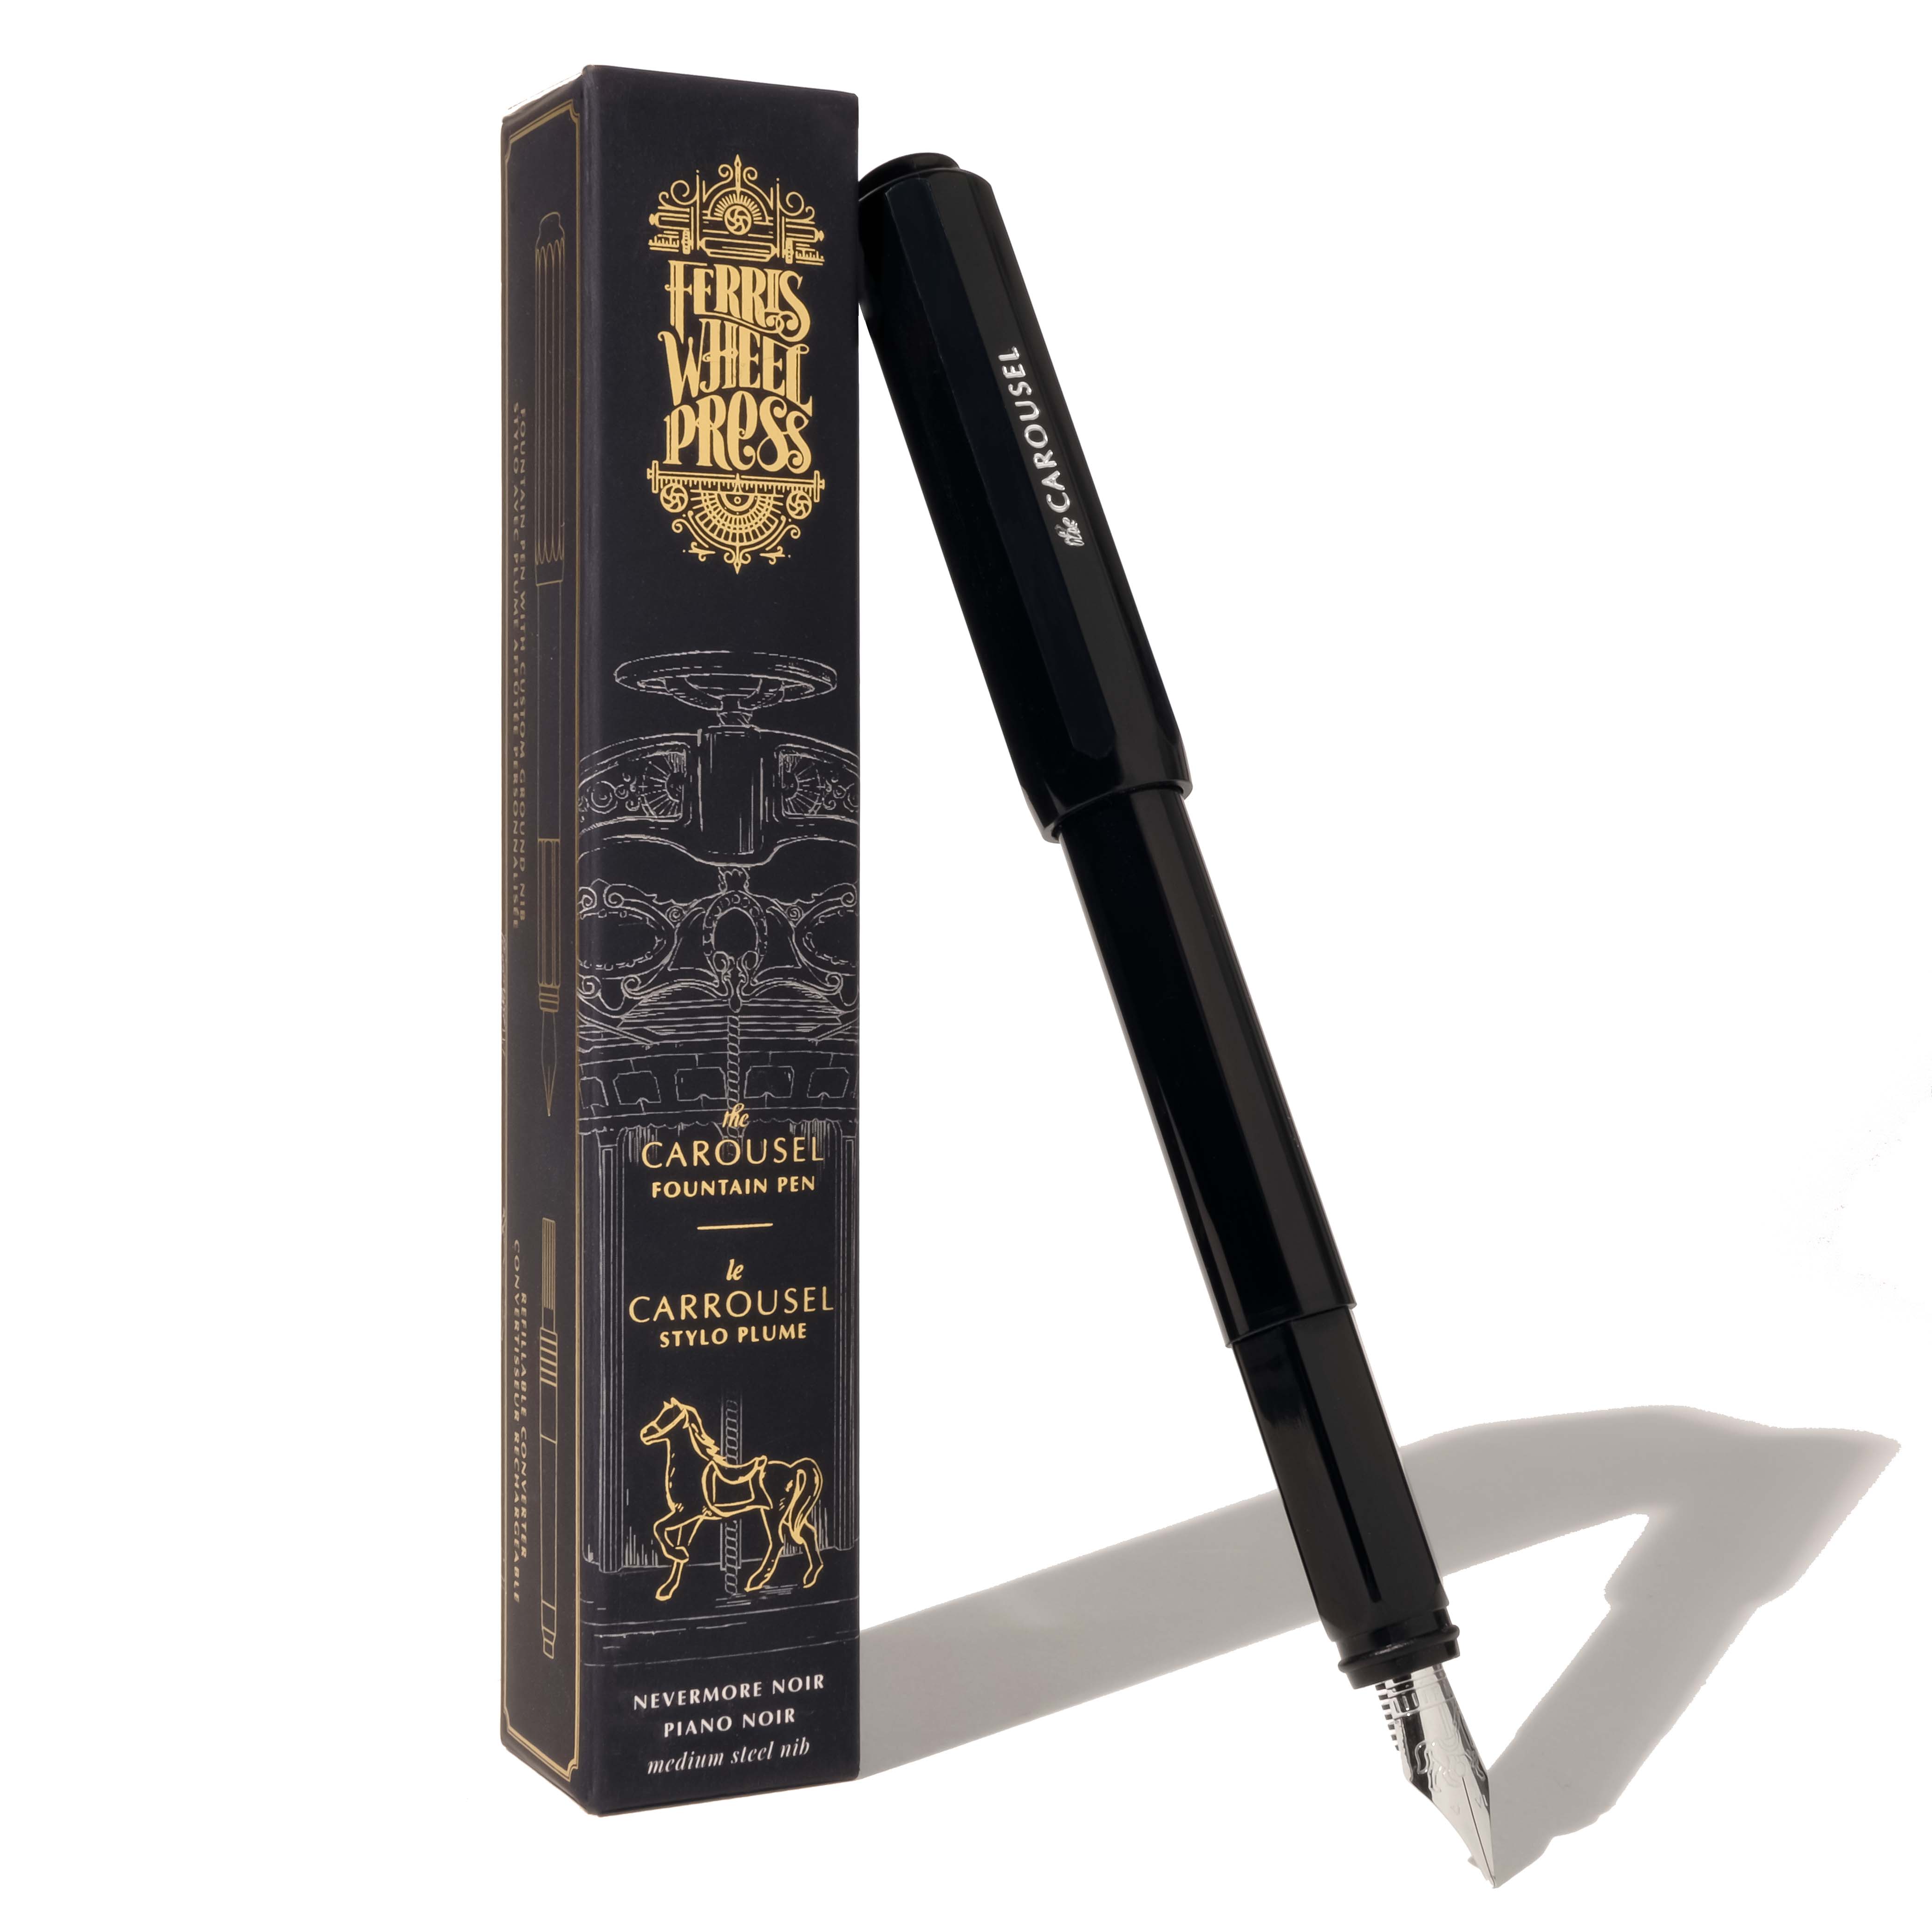 Limited Black Edition - The Carousel Fountain Pen - Nevermore Noir